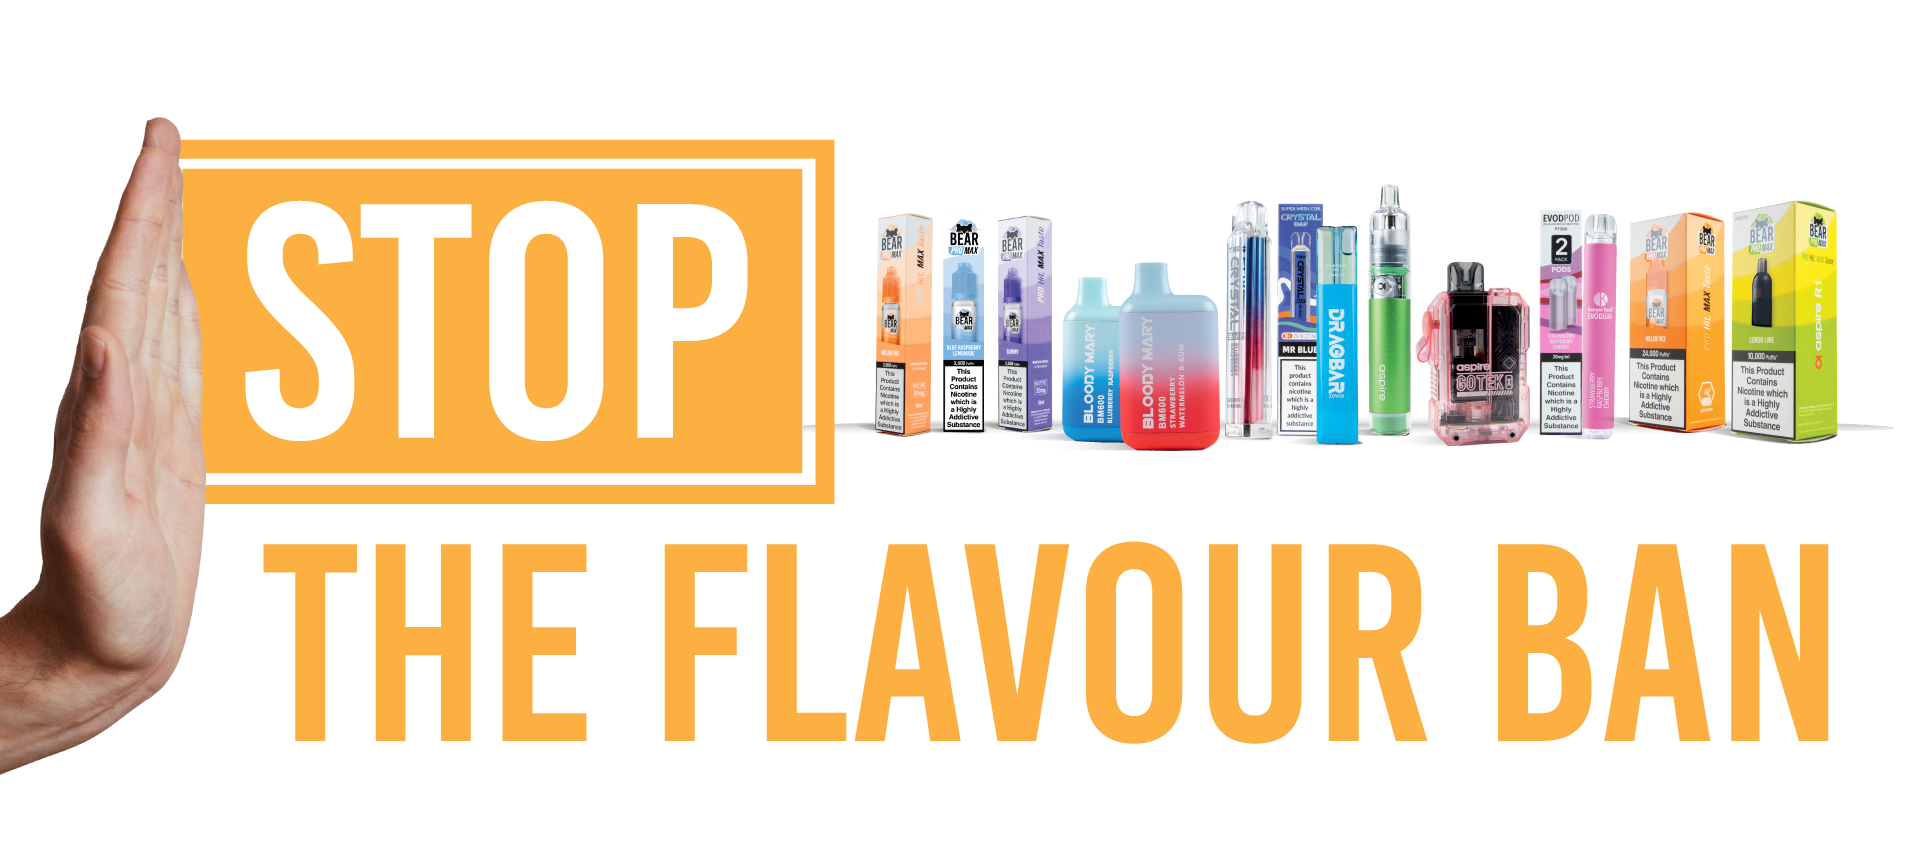 stop the flavour ban